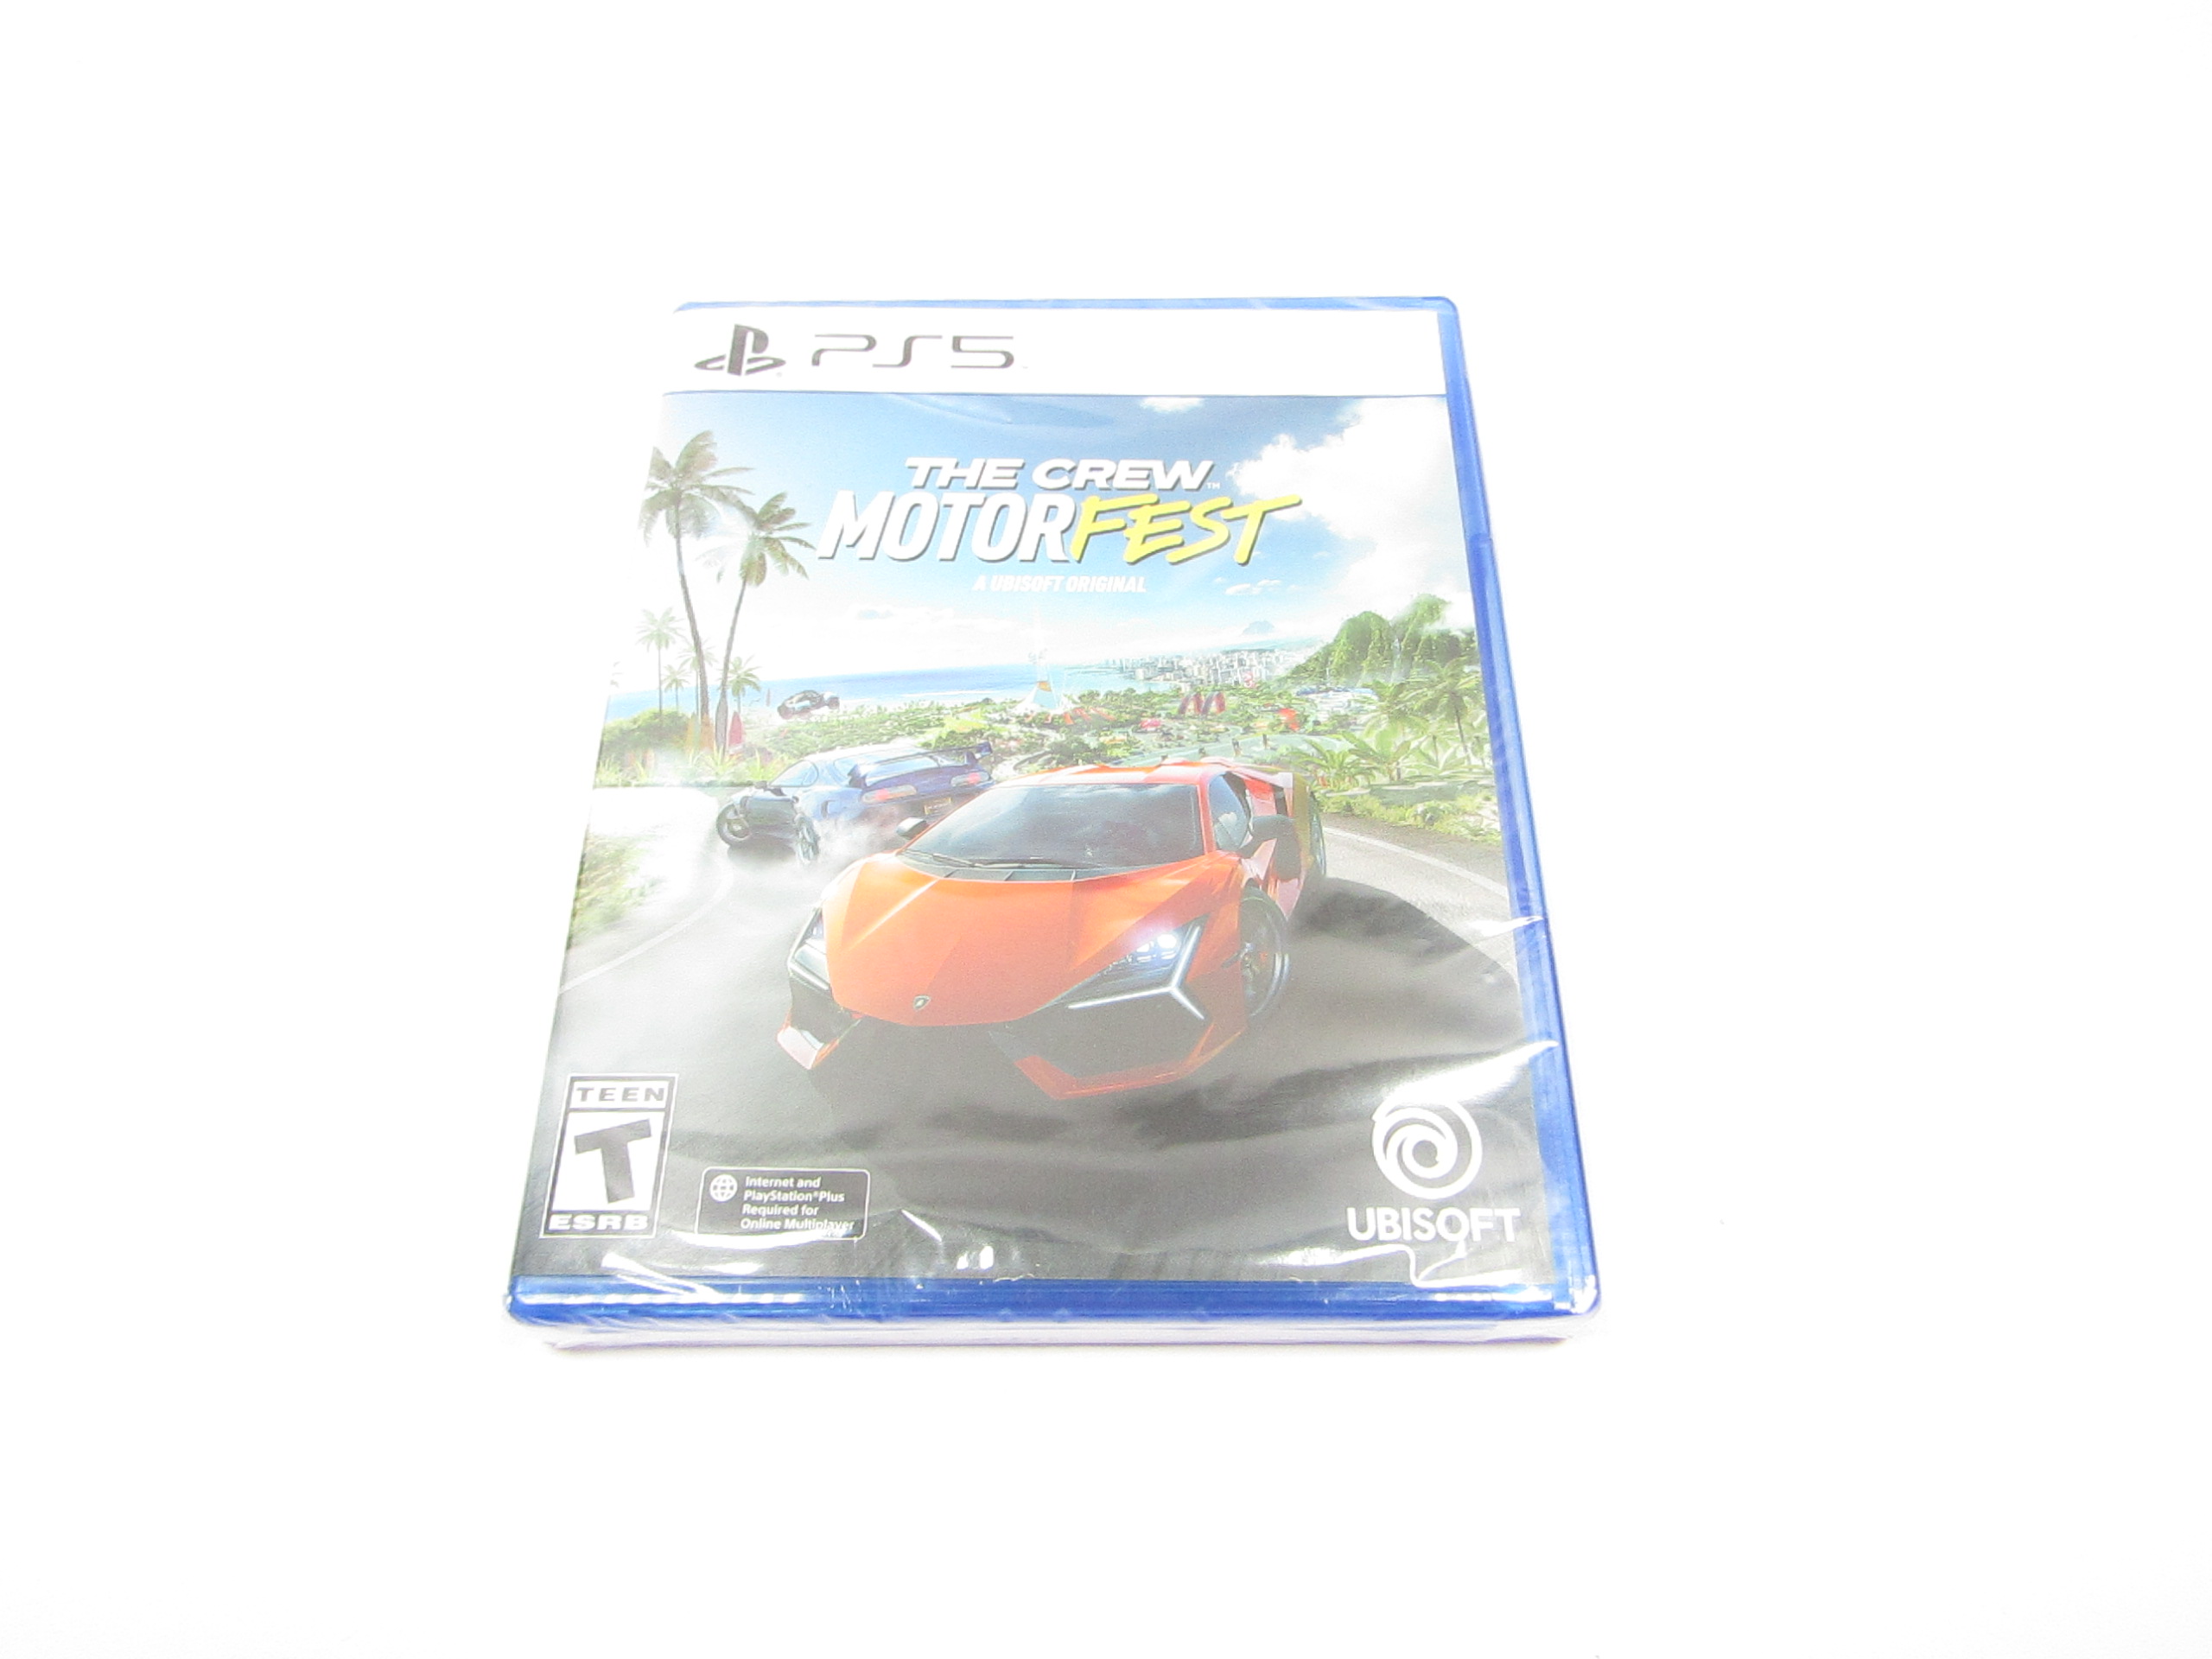 NEW! THE CREW MOTORFEST (PLAYSTATION 5 / PS5) Factory Sealed! SHIPS